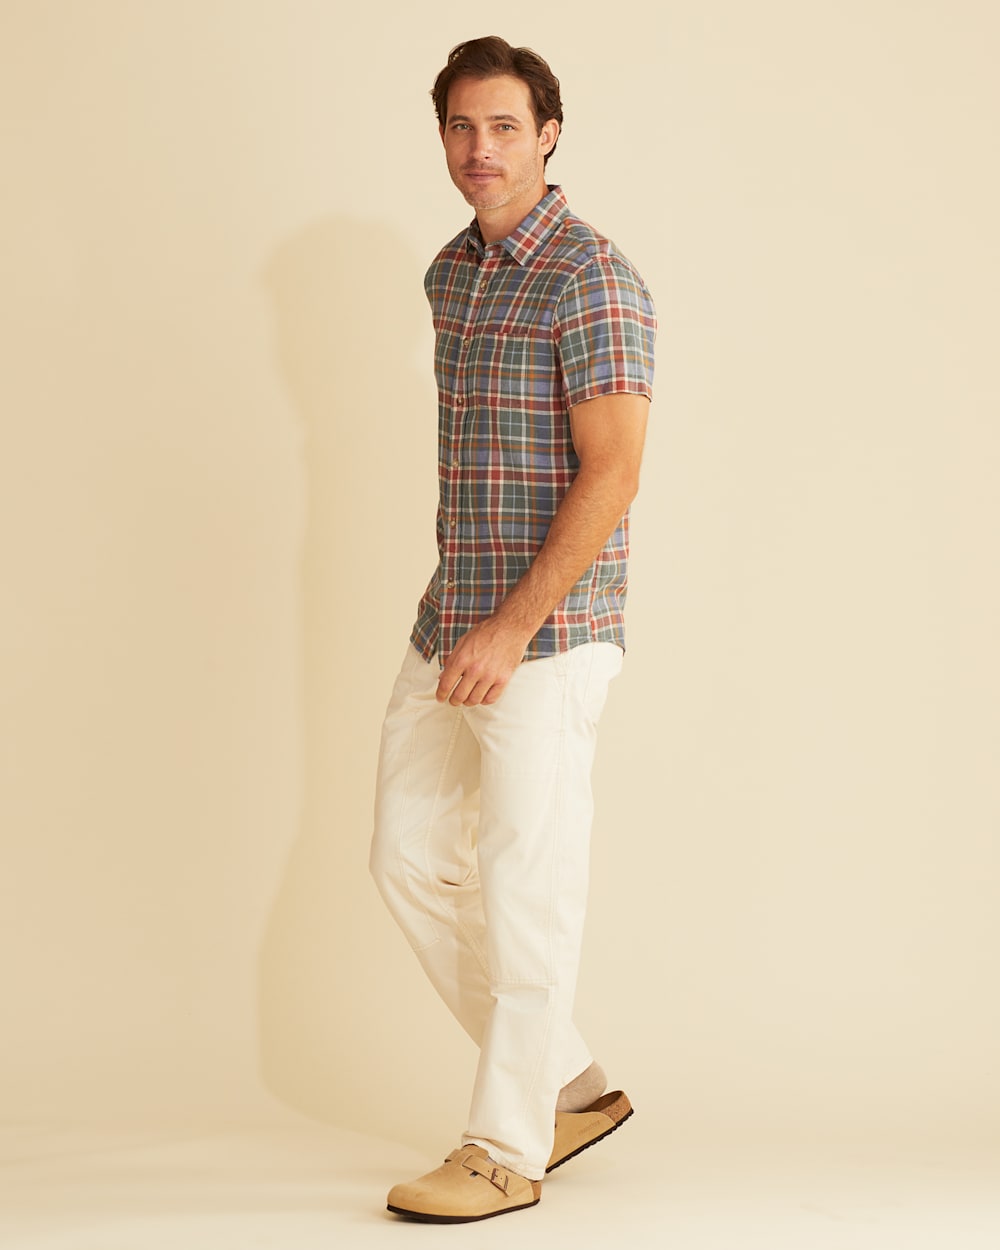 ALTERNATE VIEW OF MEN'S SHORT-SLEEVE DAWSON LINEN SHIRT IN GREEN/BLUE/RED PLAID image number 2